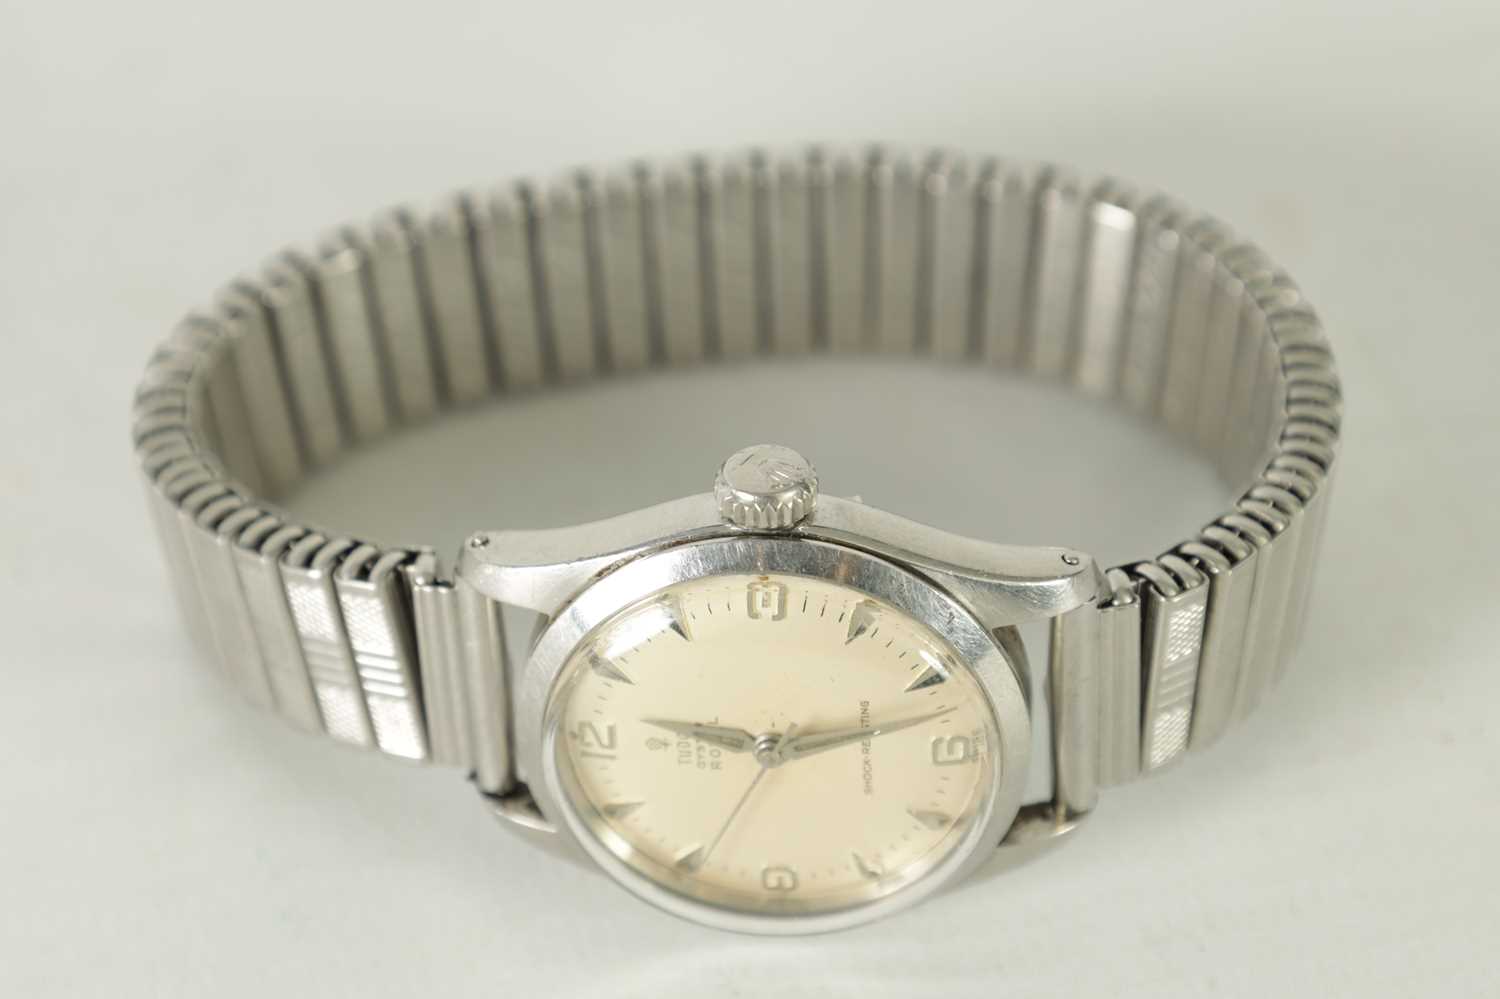 A GENTLEMAN'S 1950's STEEL TUDOR OYSTER ROYAL MANUAL WRIST WATCH - Image 2 of 5